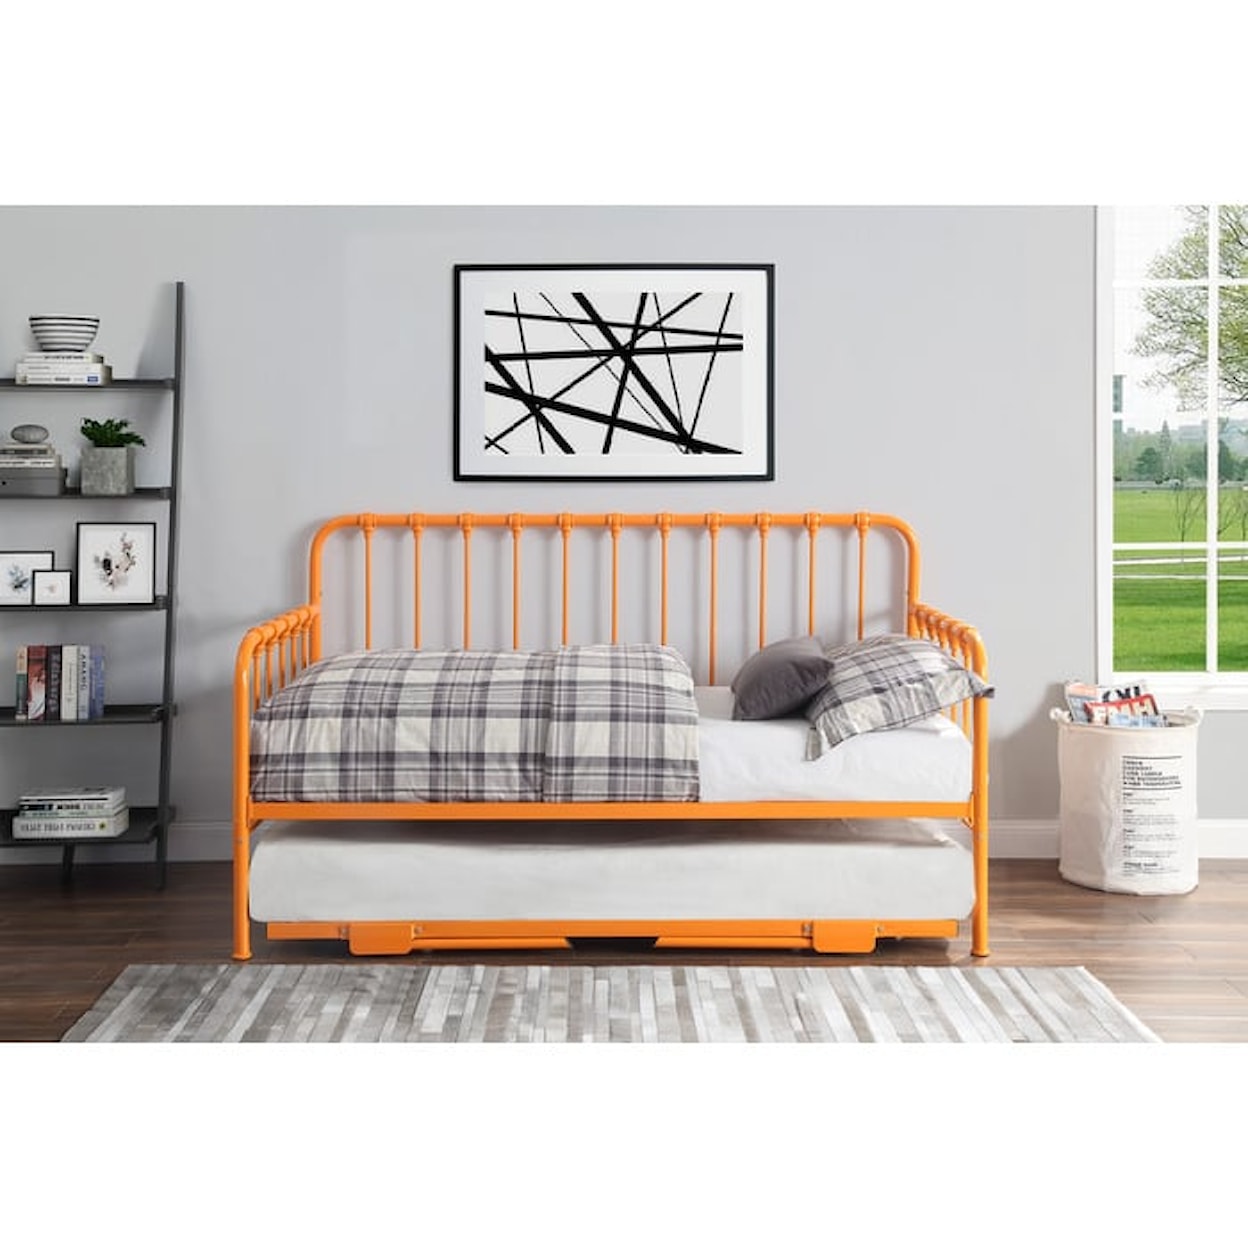 Homelegance Furniture Constance Daybed with Lift-up Trundle